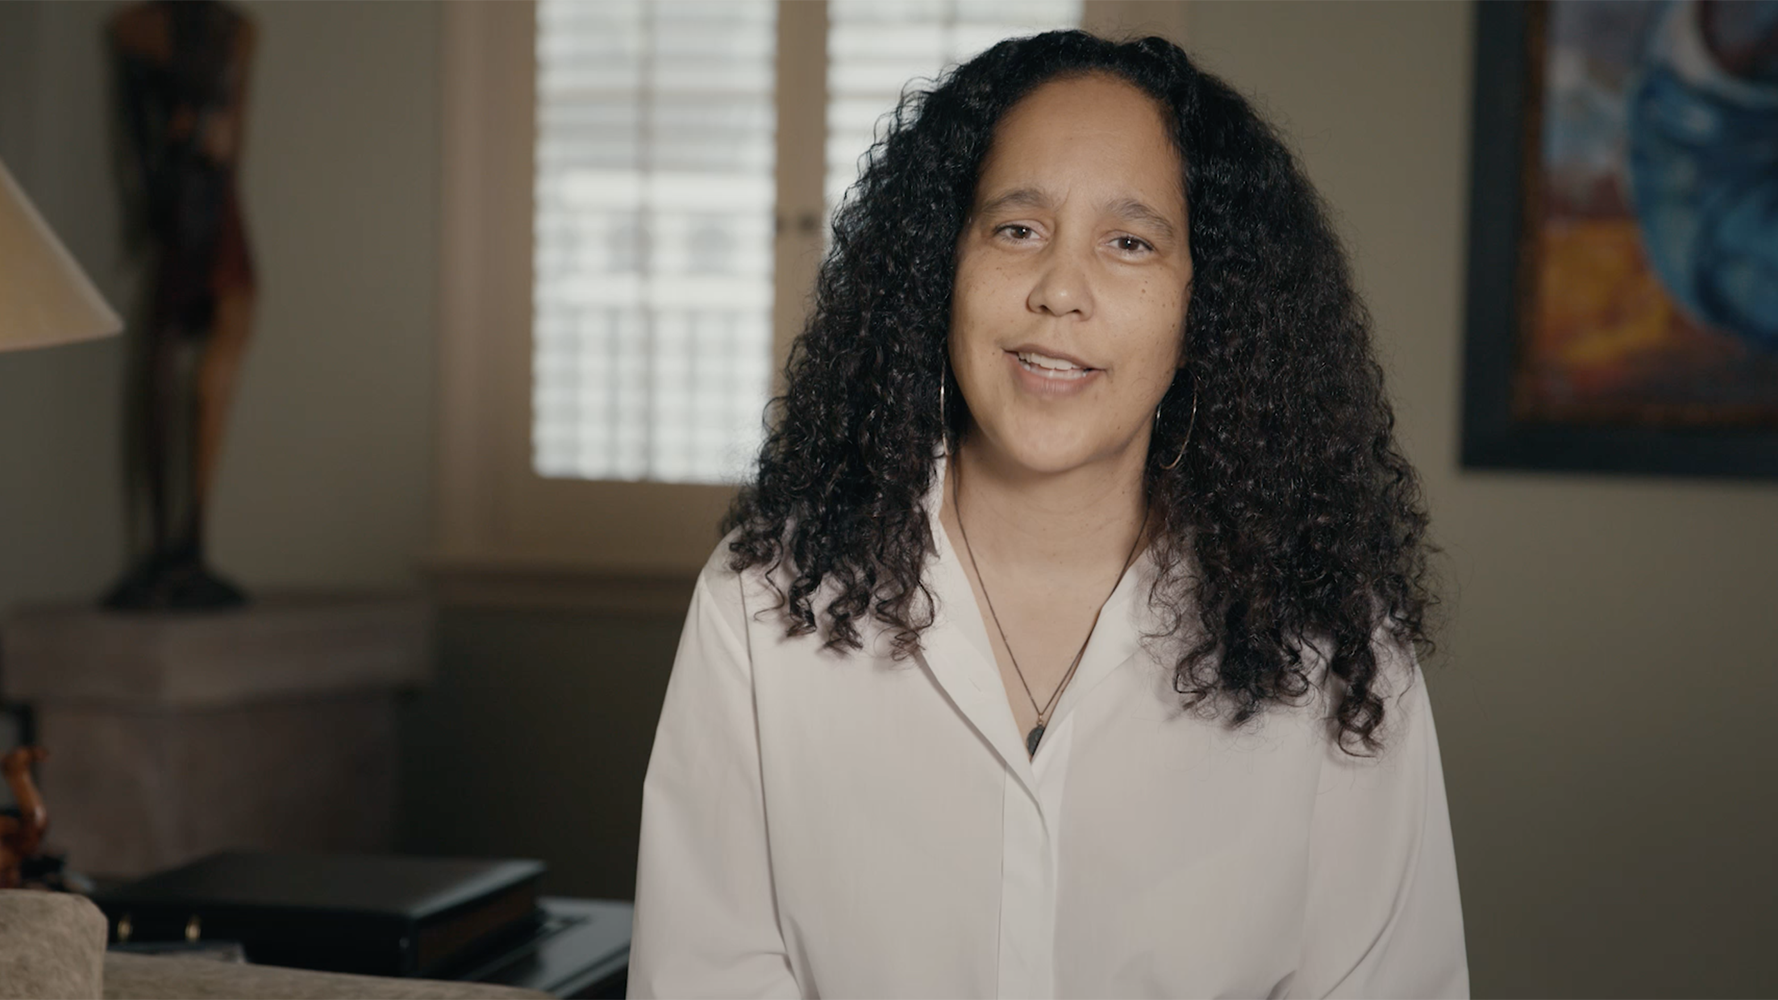 Director Gina Prince-bythewood on The Old Guard and Black Hollywood